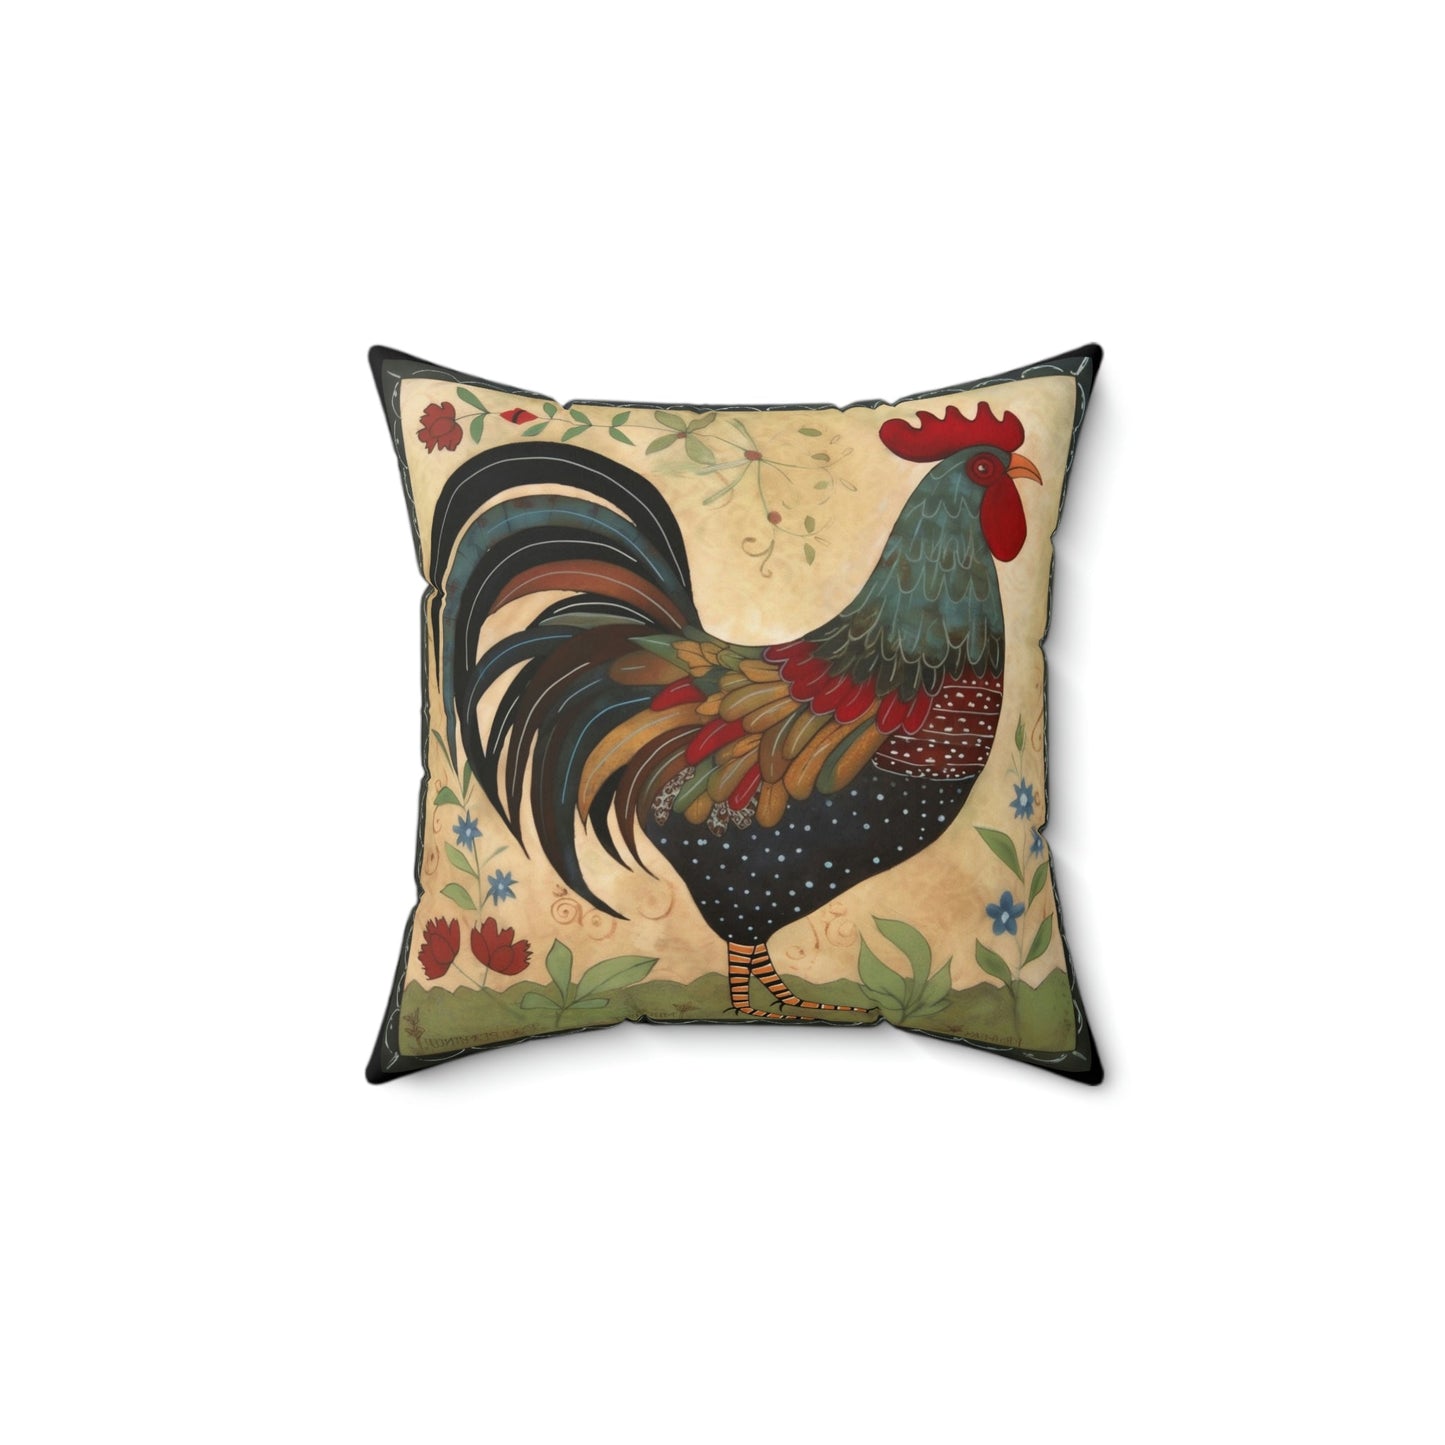 Rustic Folk Art Rooster Design Square Pillow - Cottagecore Country Farm Style Gift for Yourself or Loved Ones